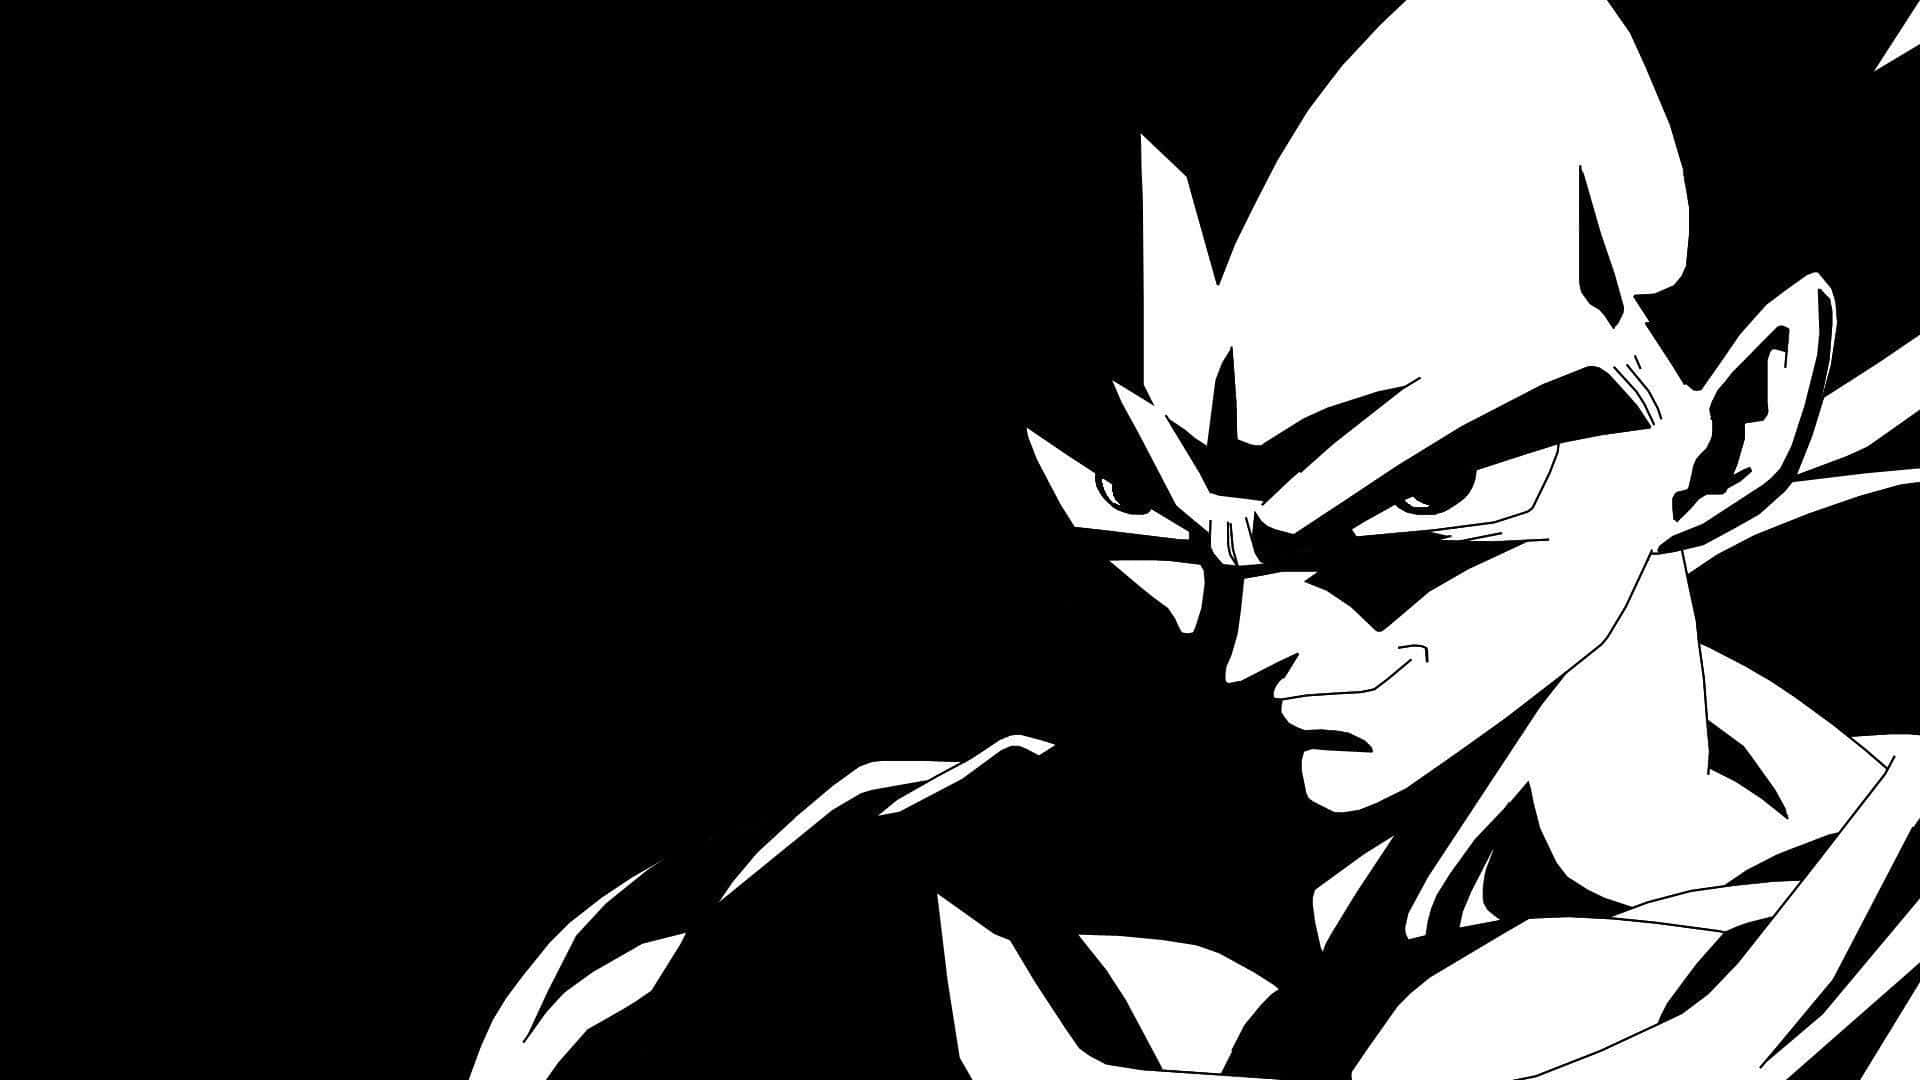 "The power of Dragon Ball Black and White will reign supreme." Wallpaper